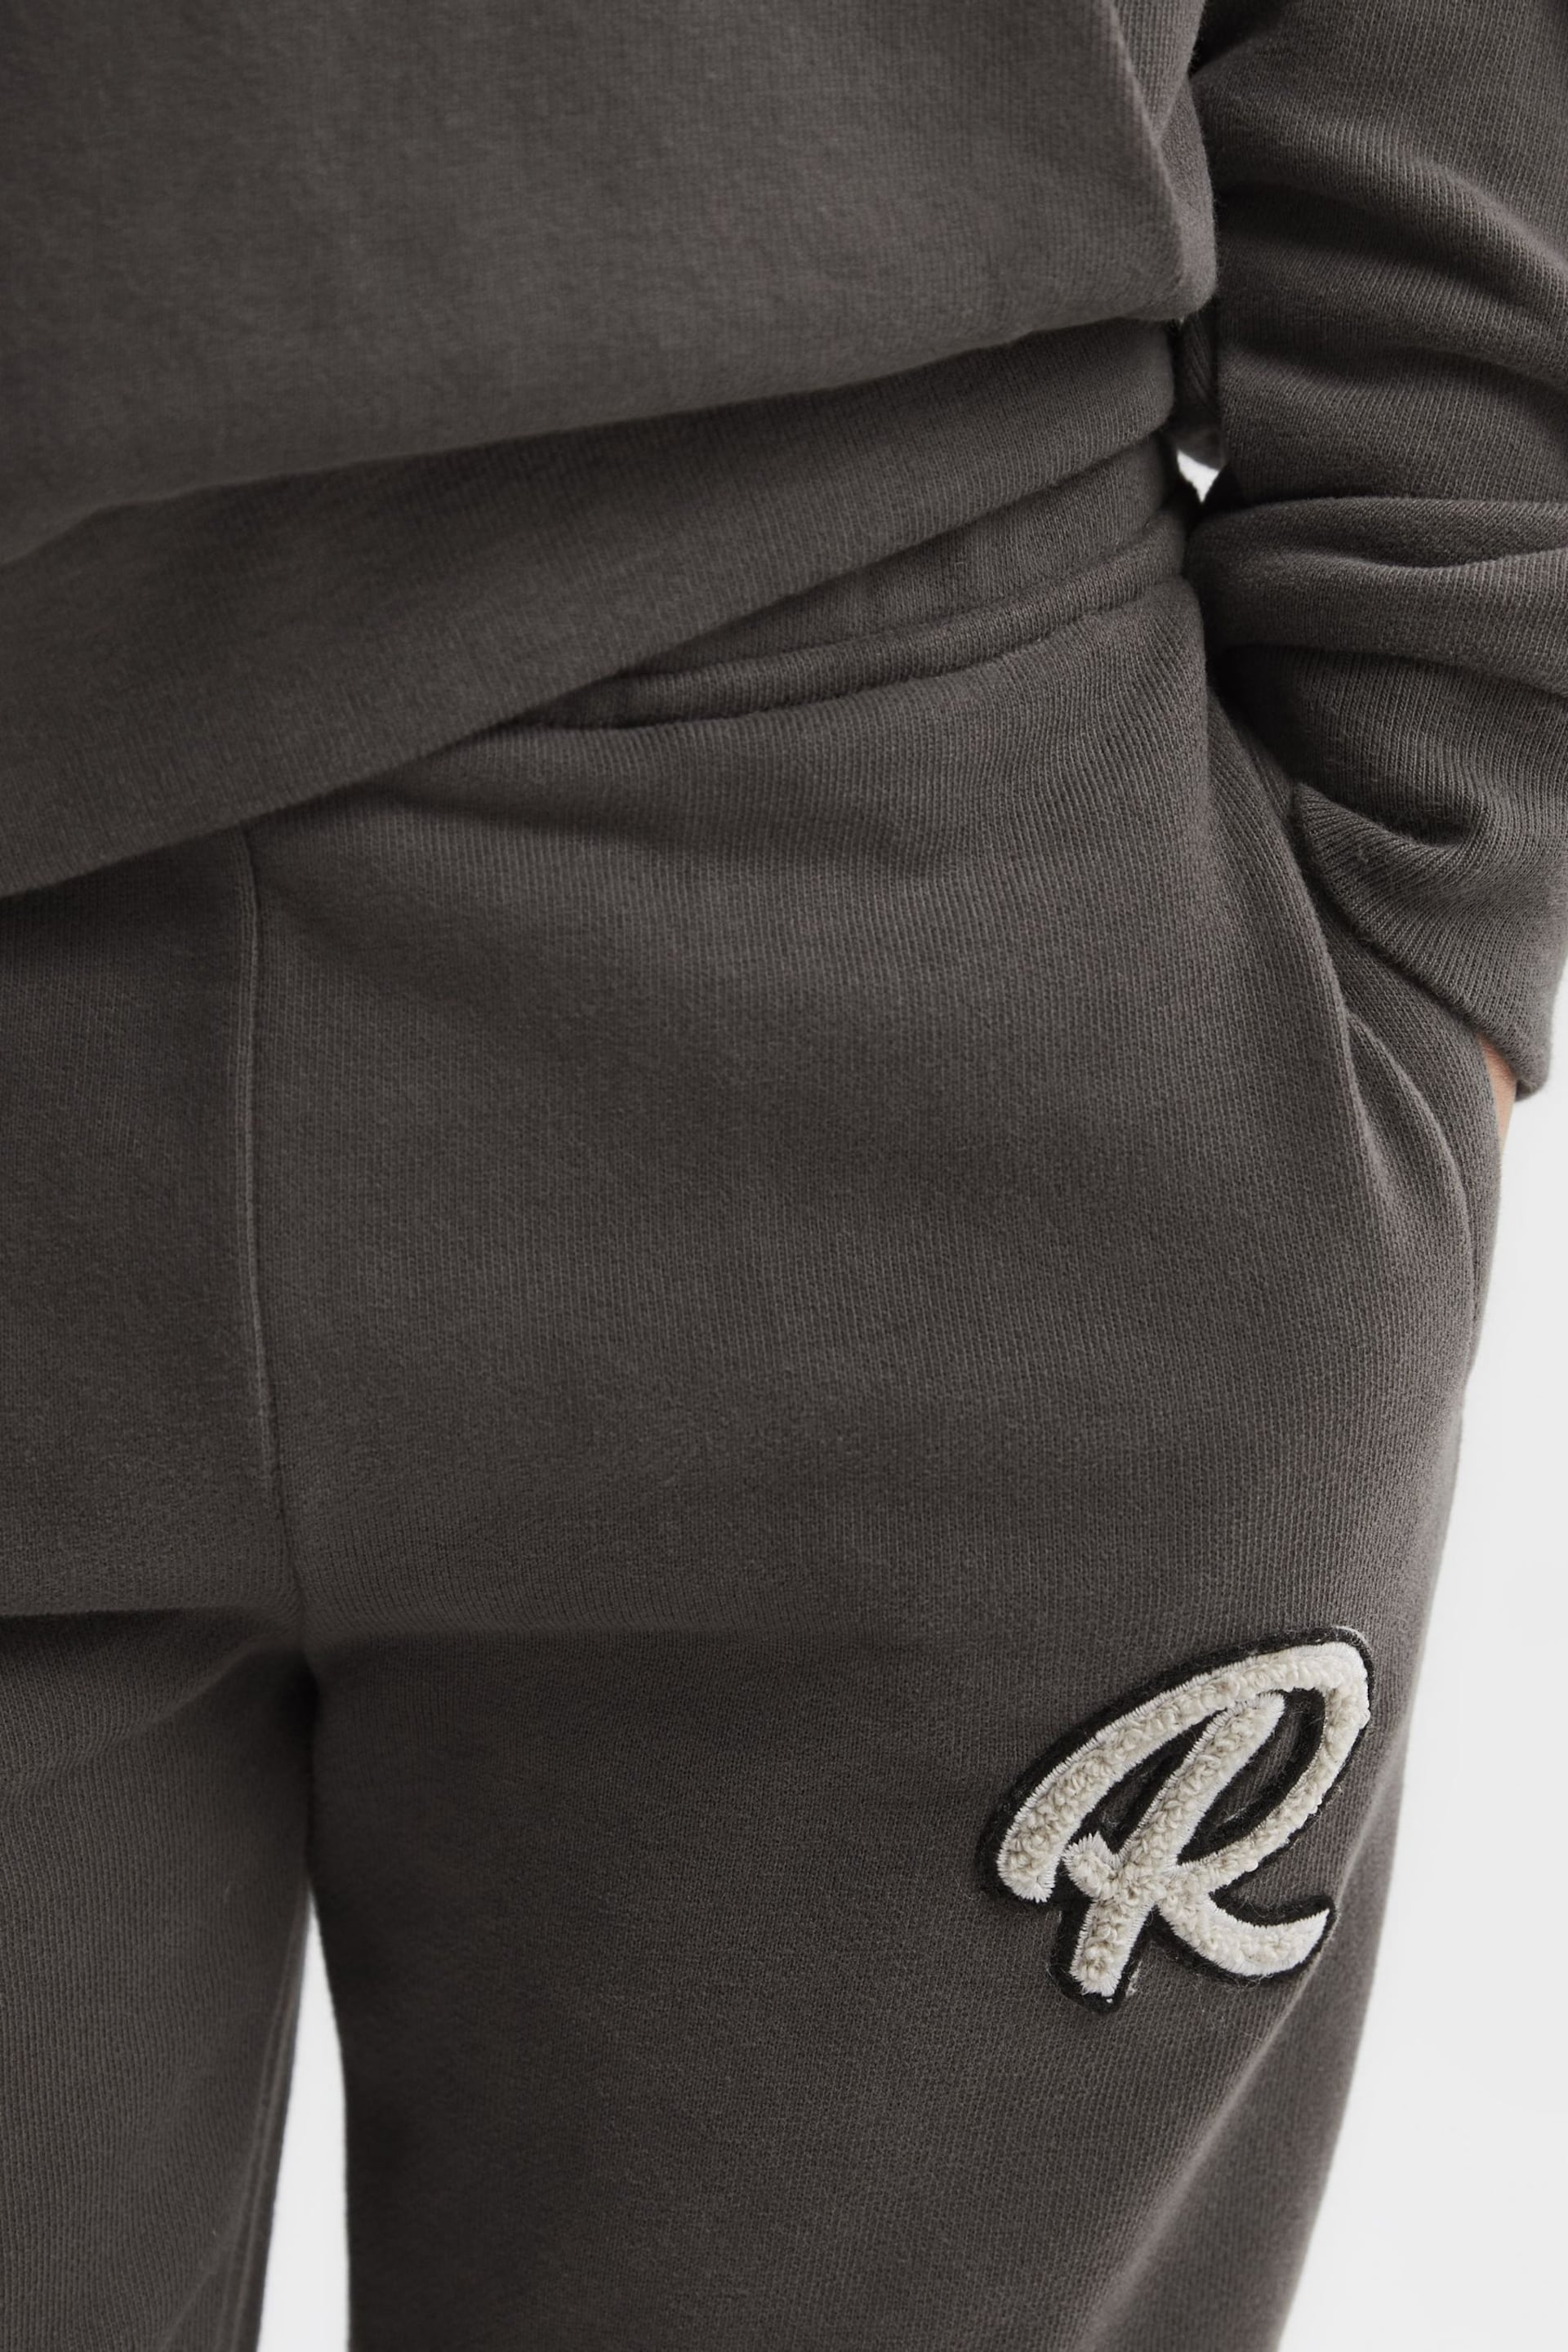 Reiss Olive Toby Garment Dyed Logo Joggers - Image 4 of 6